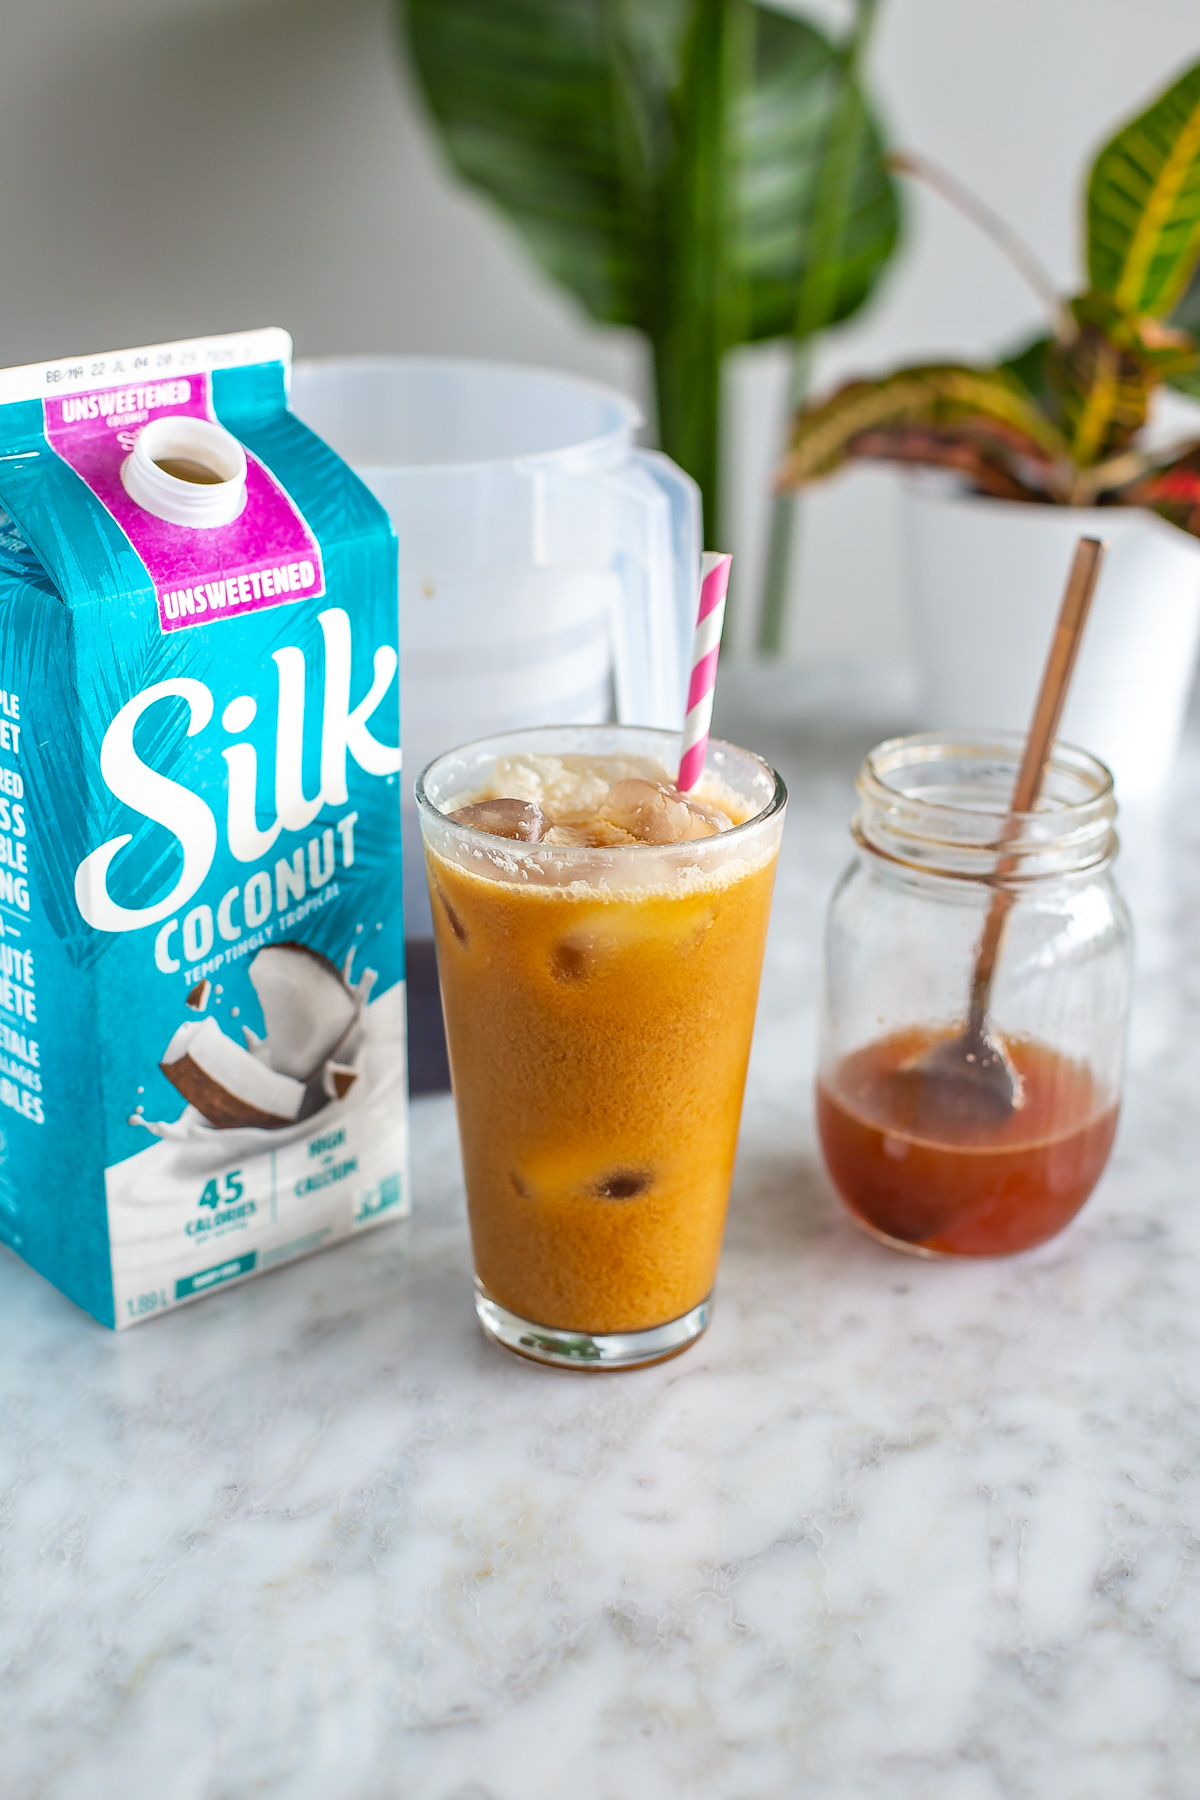 A glass of toasted coconut cold brew placed in between a carton of coconut milk and toasted coconut syrup.